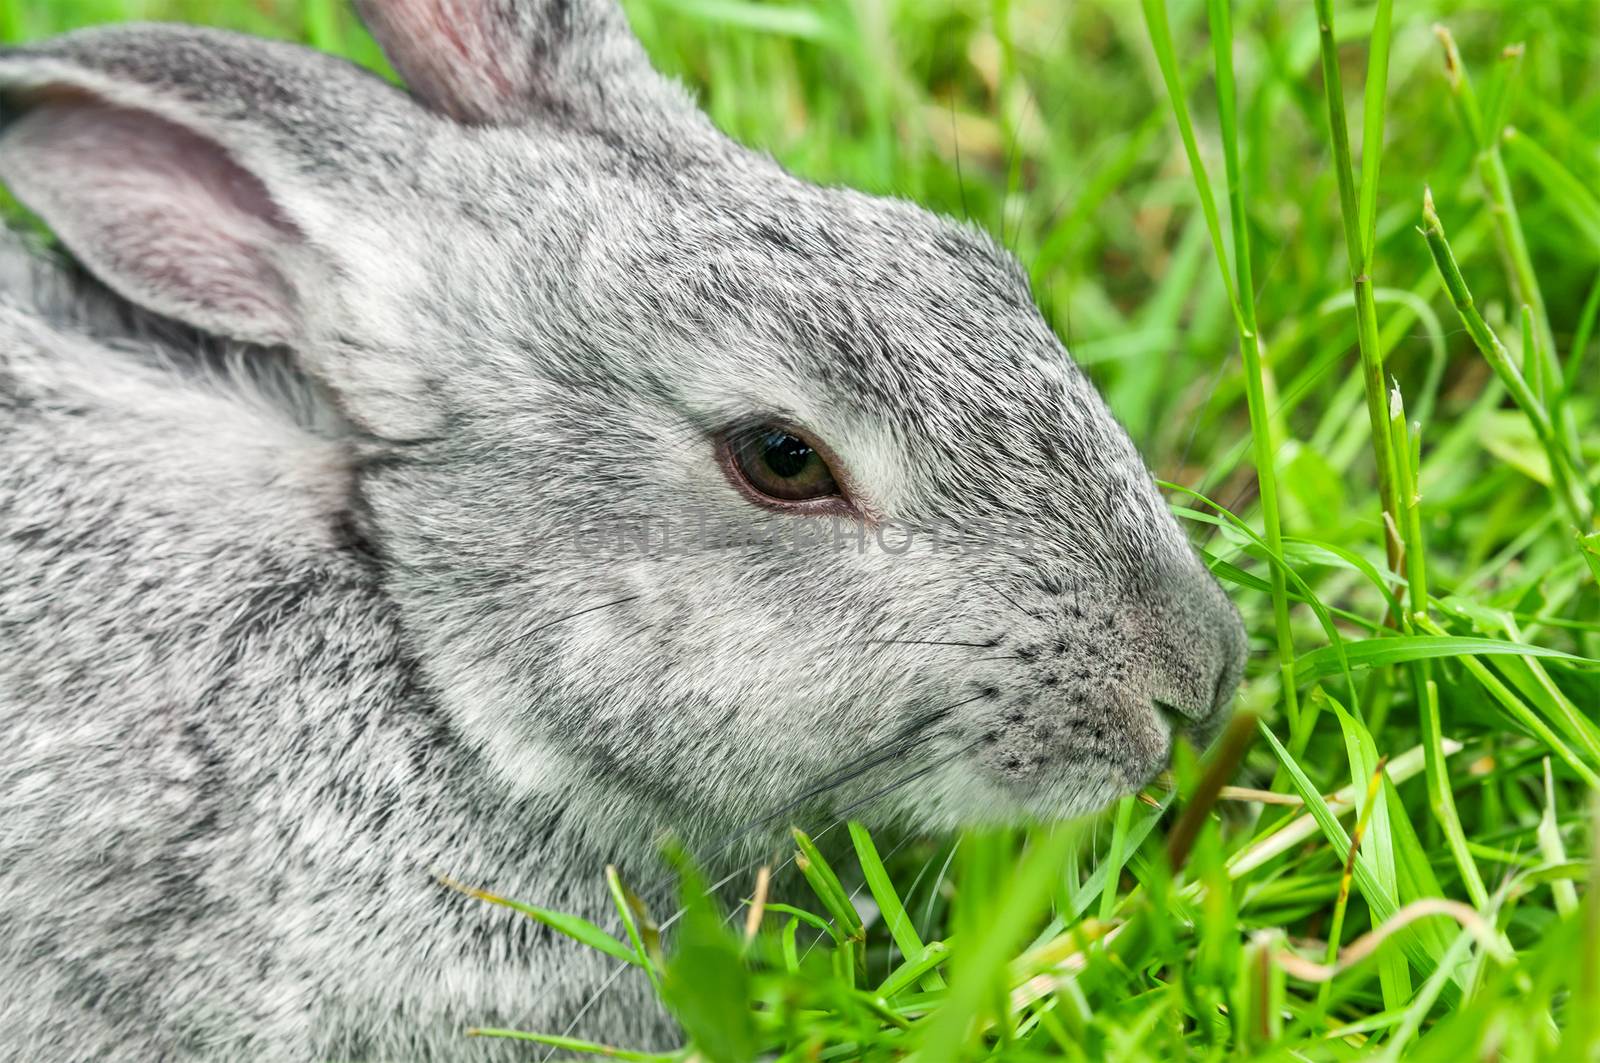 Rabbit sitting in grass, smiling at camera by zeffss